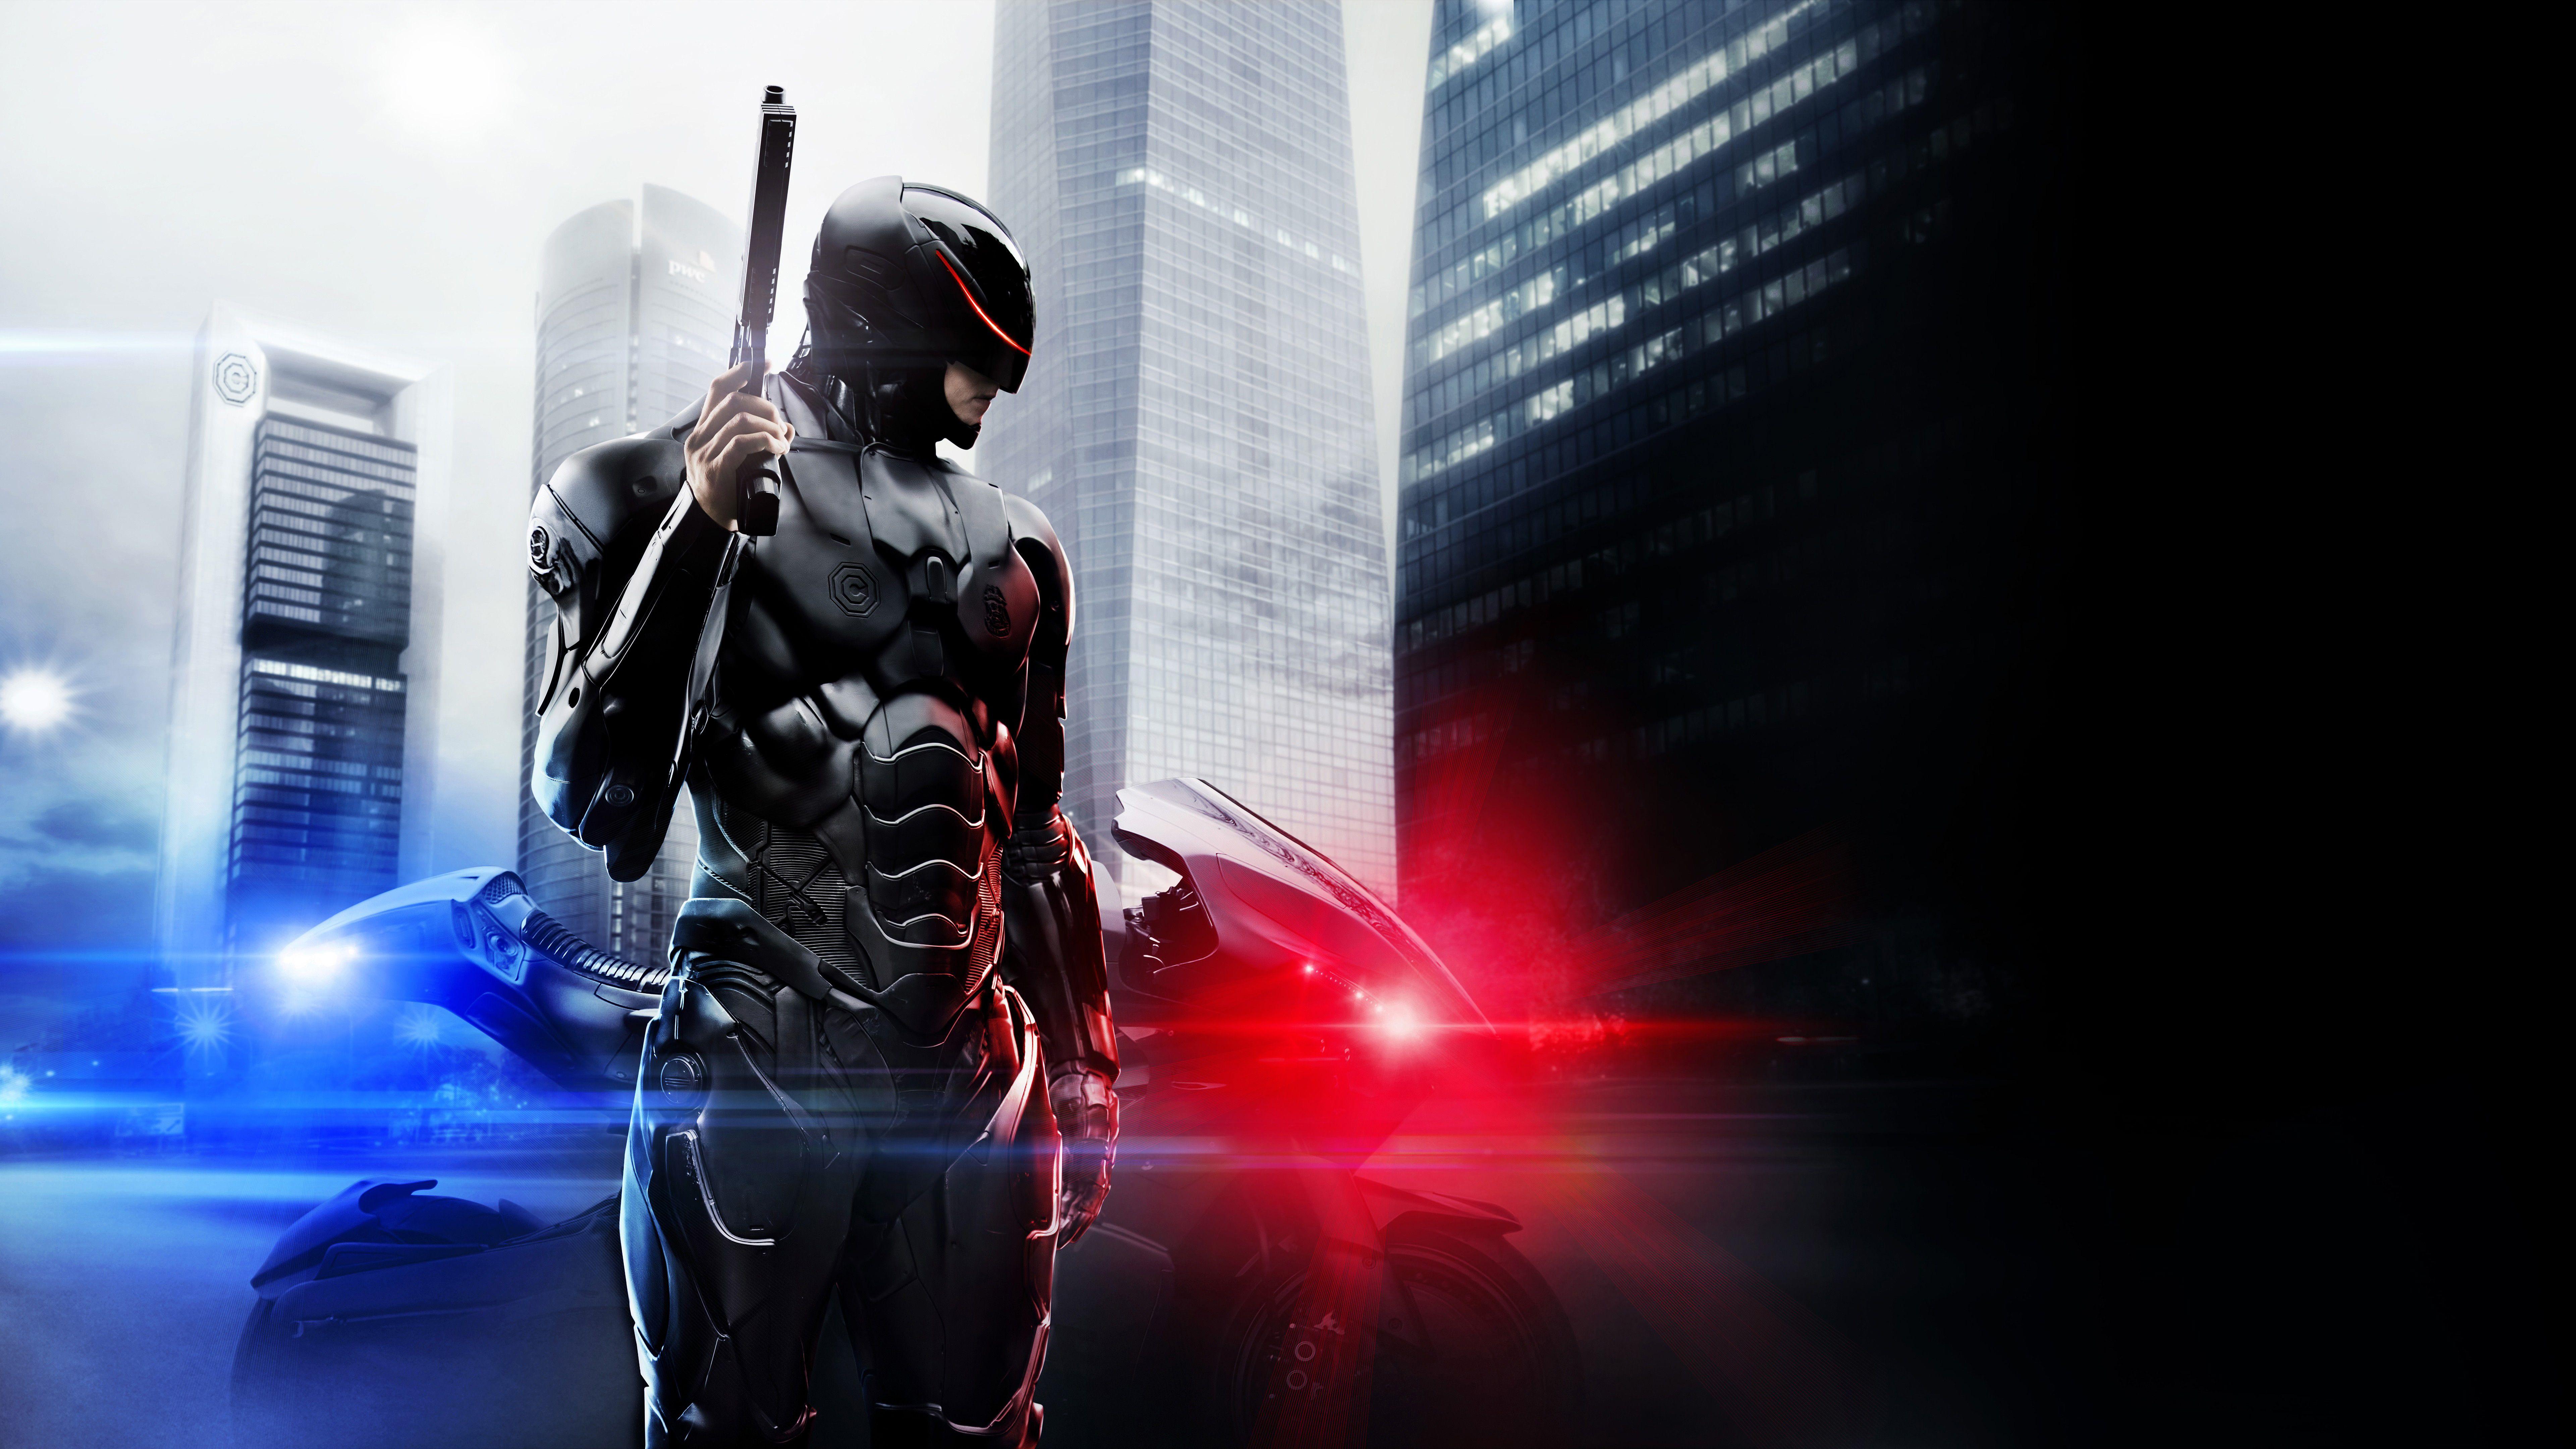 Download Robocop 2014 wallpapers for mobile phone free Robocop  2014 HD pictures